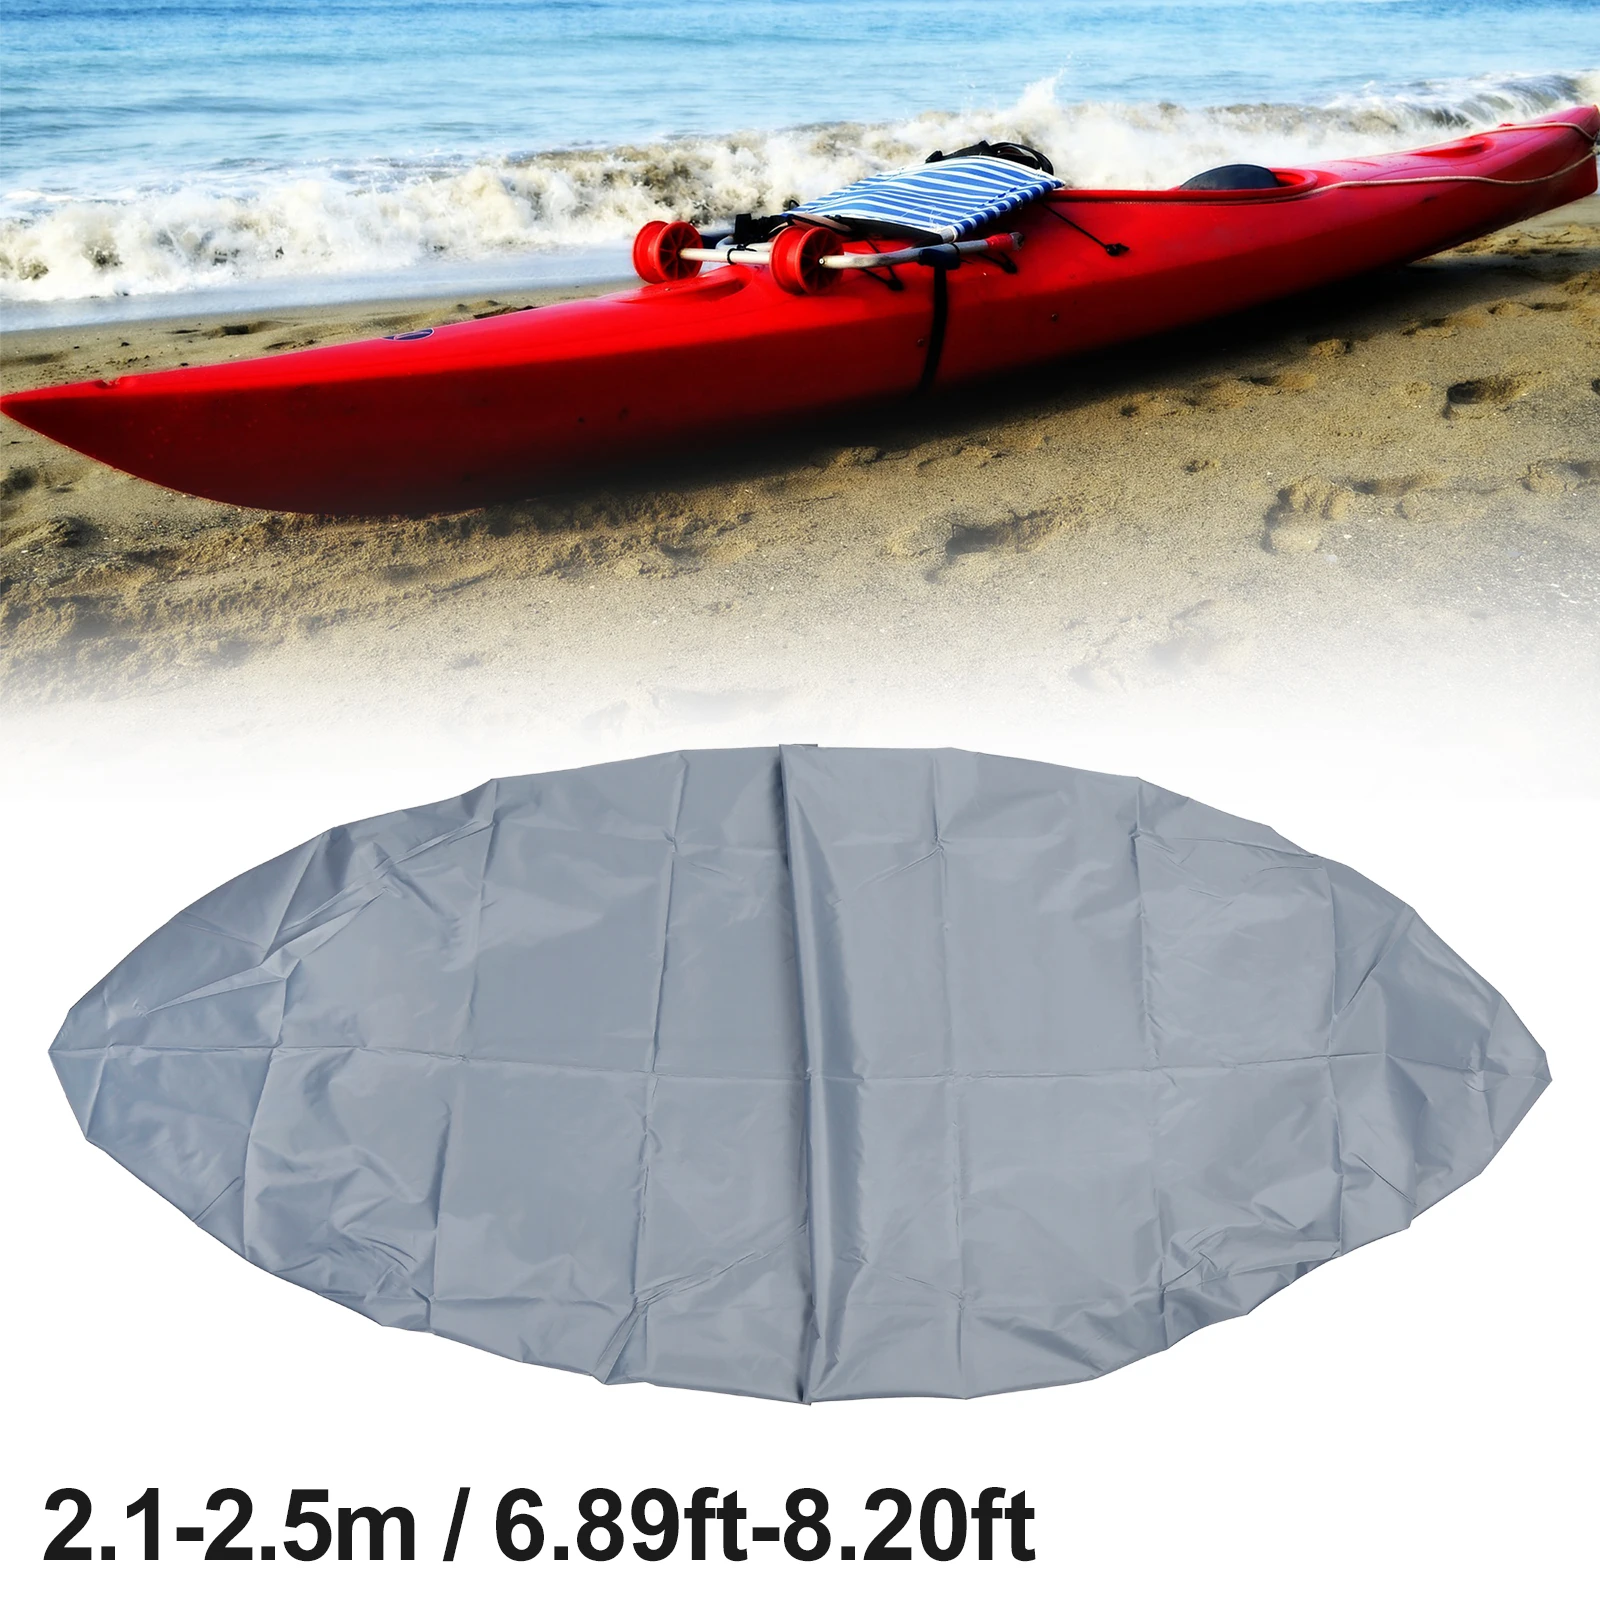 

X Autohaux Universual Kayak Cover Professional Boat Canoe Storage UV Resistant Dustproof Waterproof Cover Gray Boat Accessories